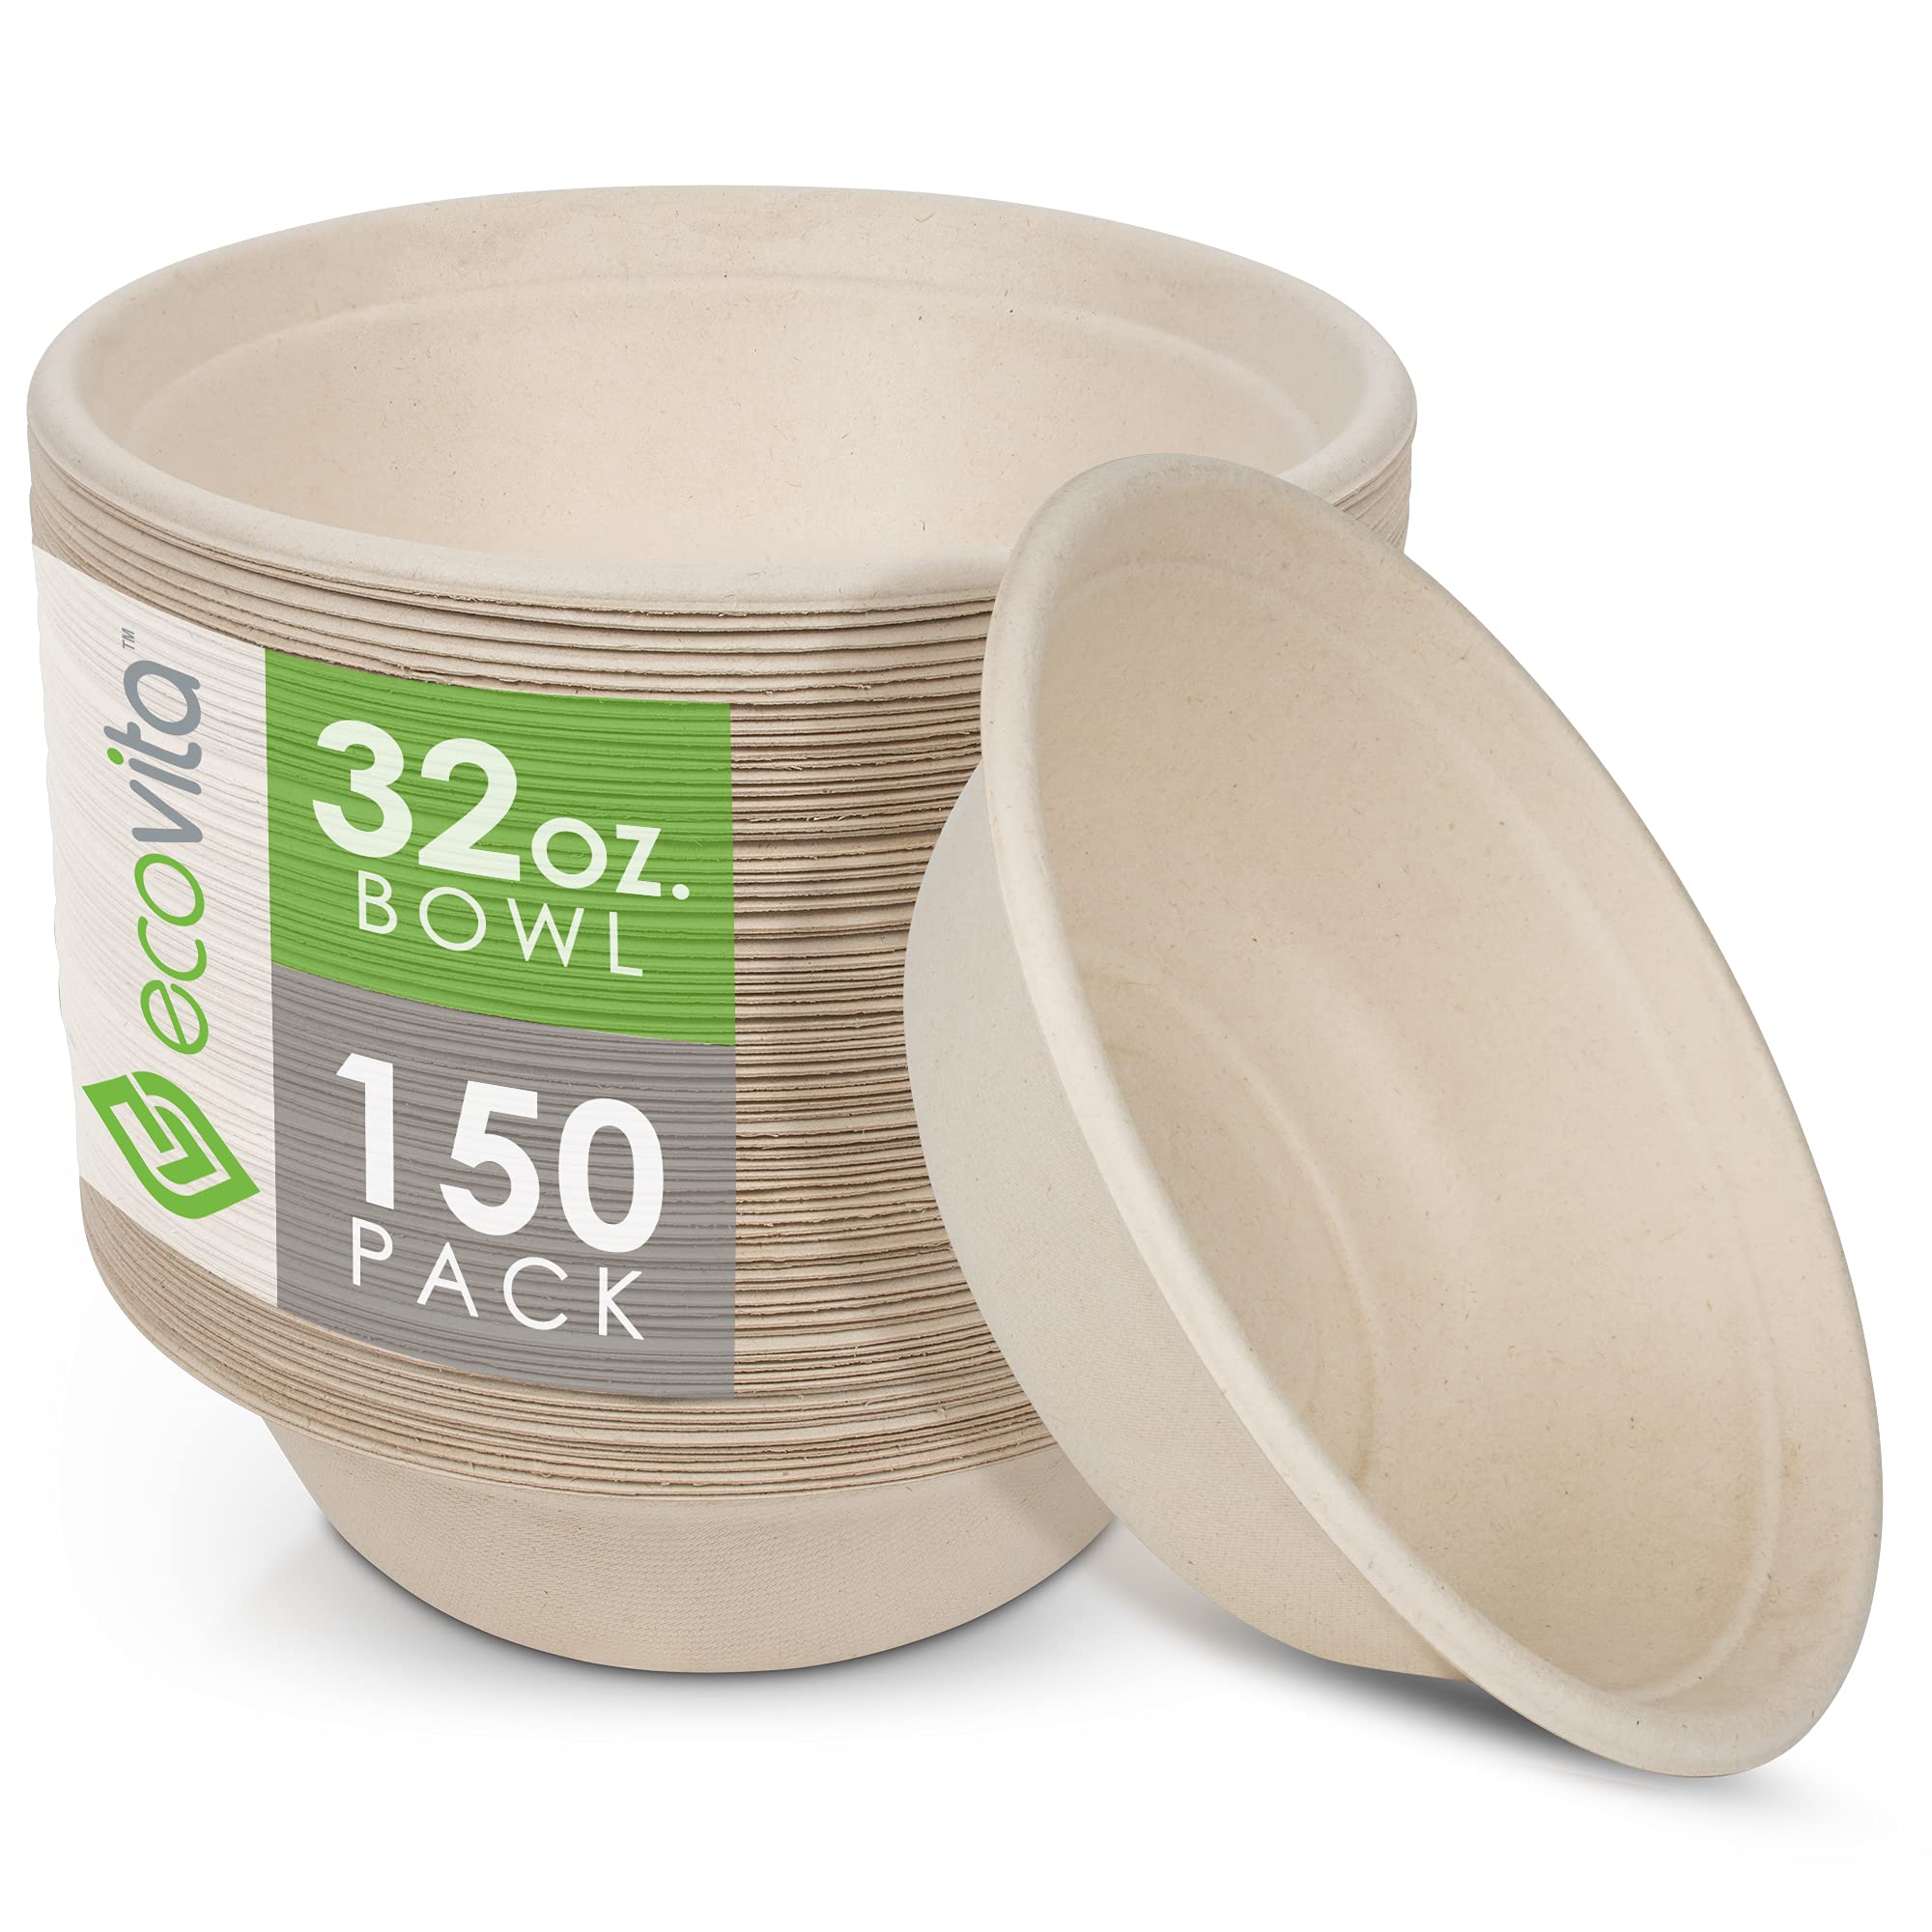 100% Compostable Paper Bowls [32 oz.] – 150 Disposable Bowls Eco Friendly Sturdy Tree Free Liquid and Heat Resistant Alternative to Plastic or Pape...